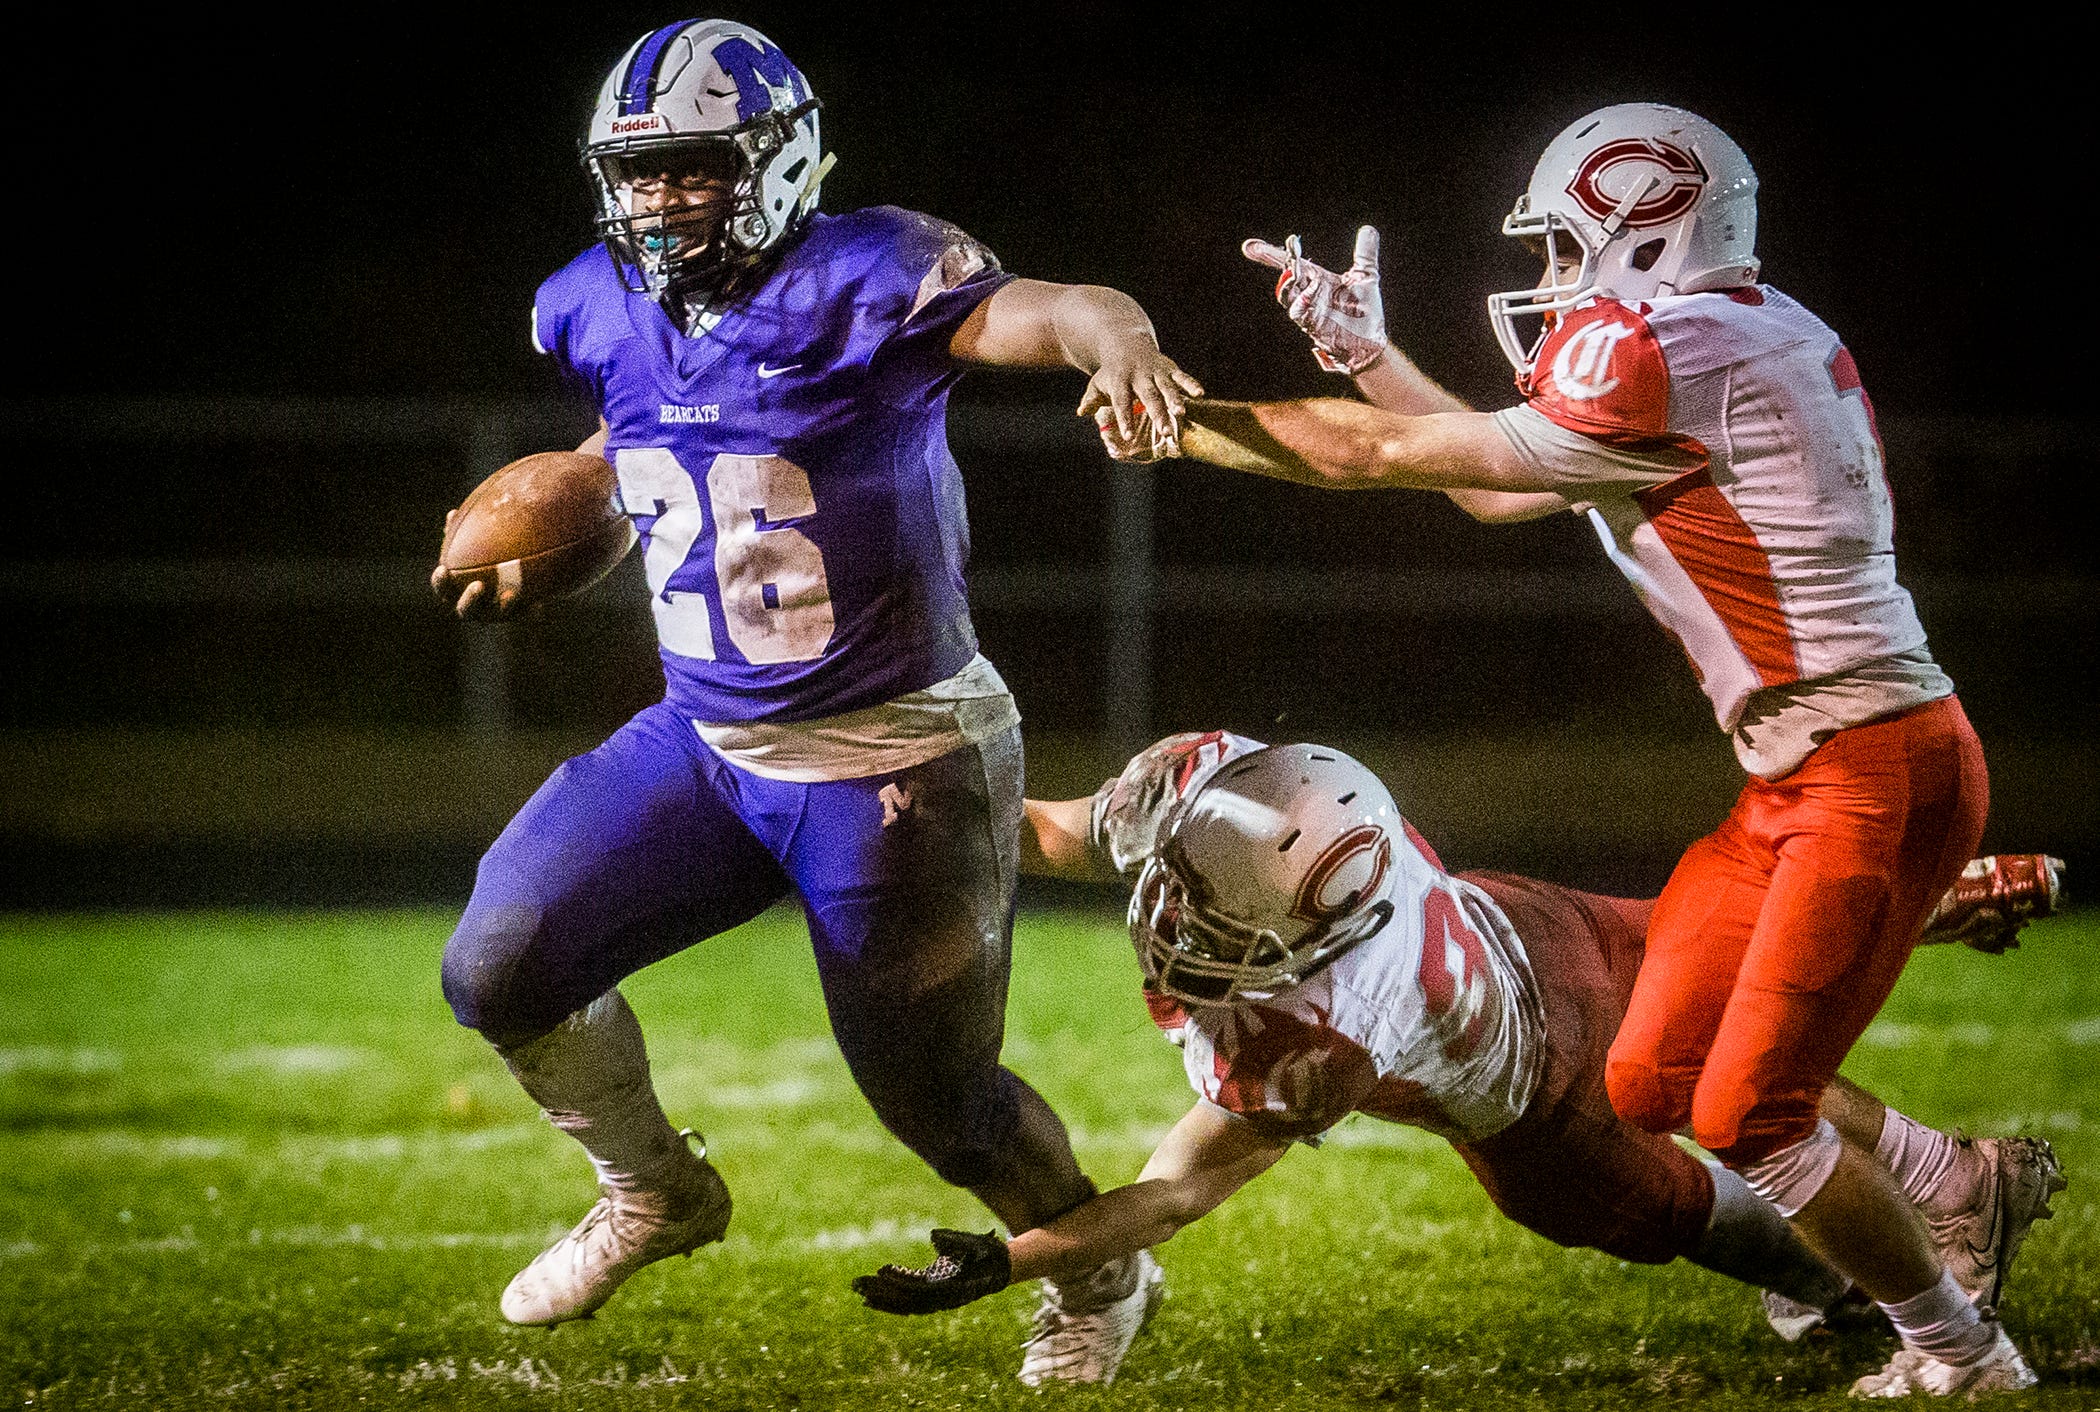 Muncie Central football loses sectional opener to end Bearcats season